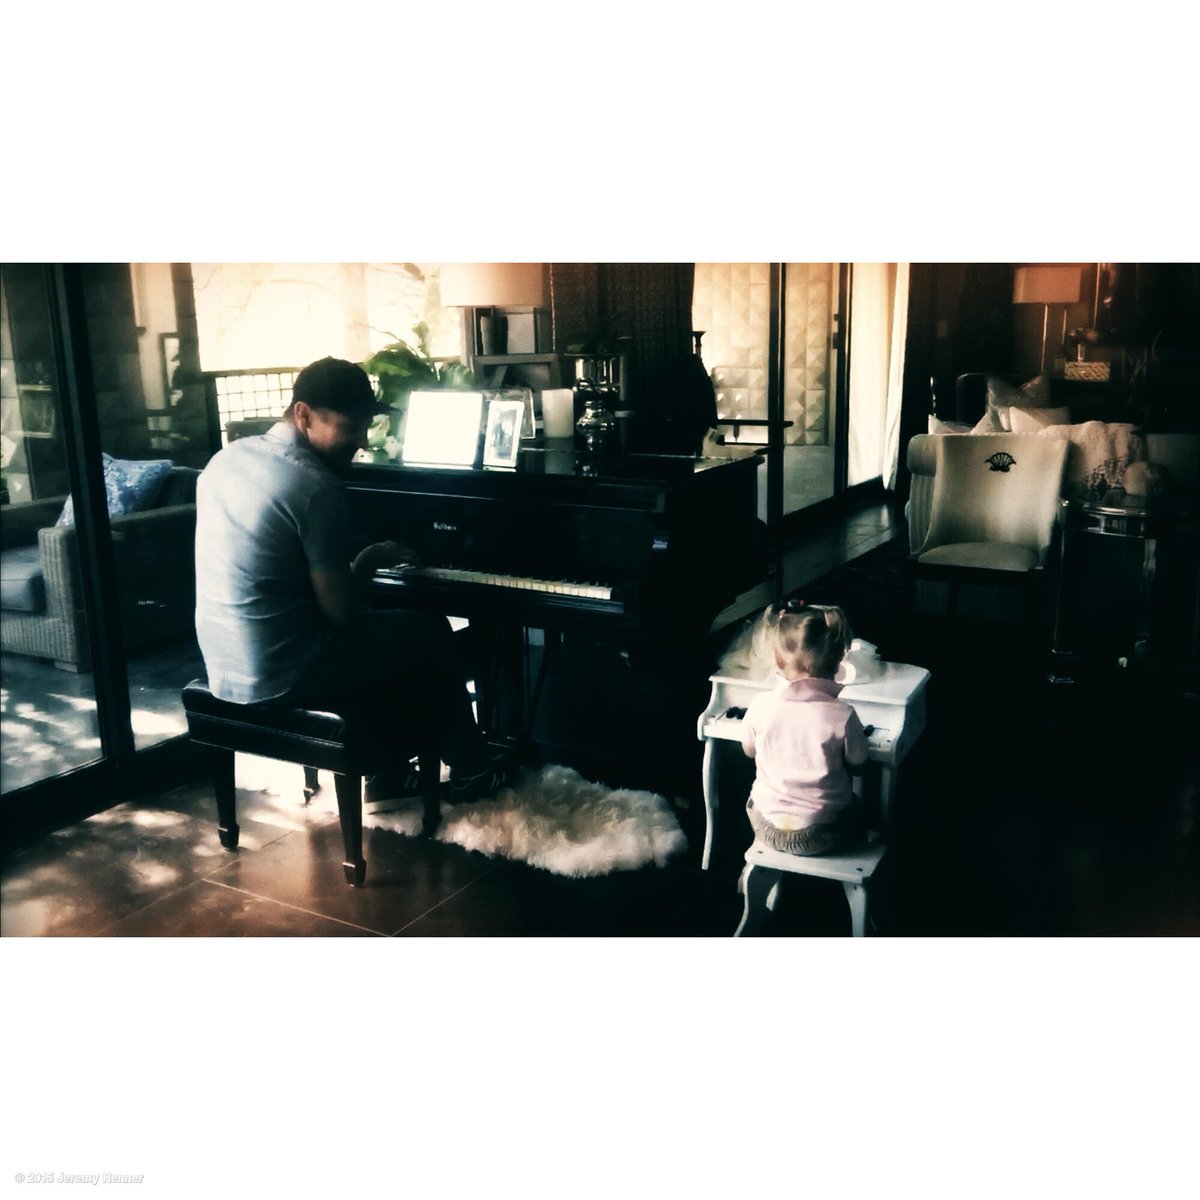 Working at home today on a new song...got some help! #music #holidays #daddytime #piano #lovethis https://t.co/M7lFxWzWc9